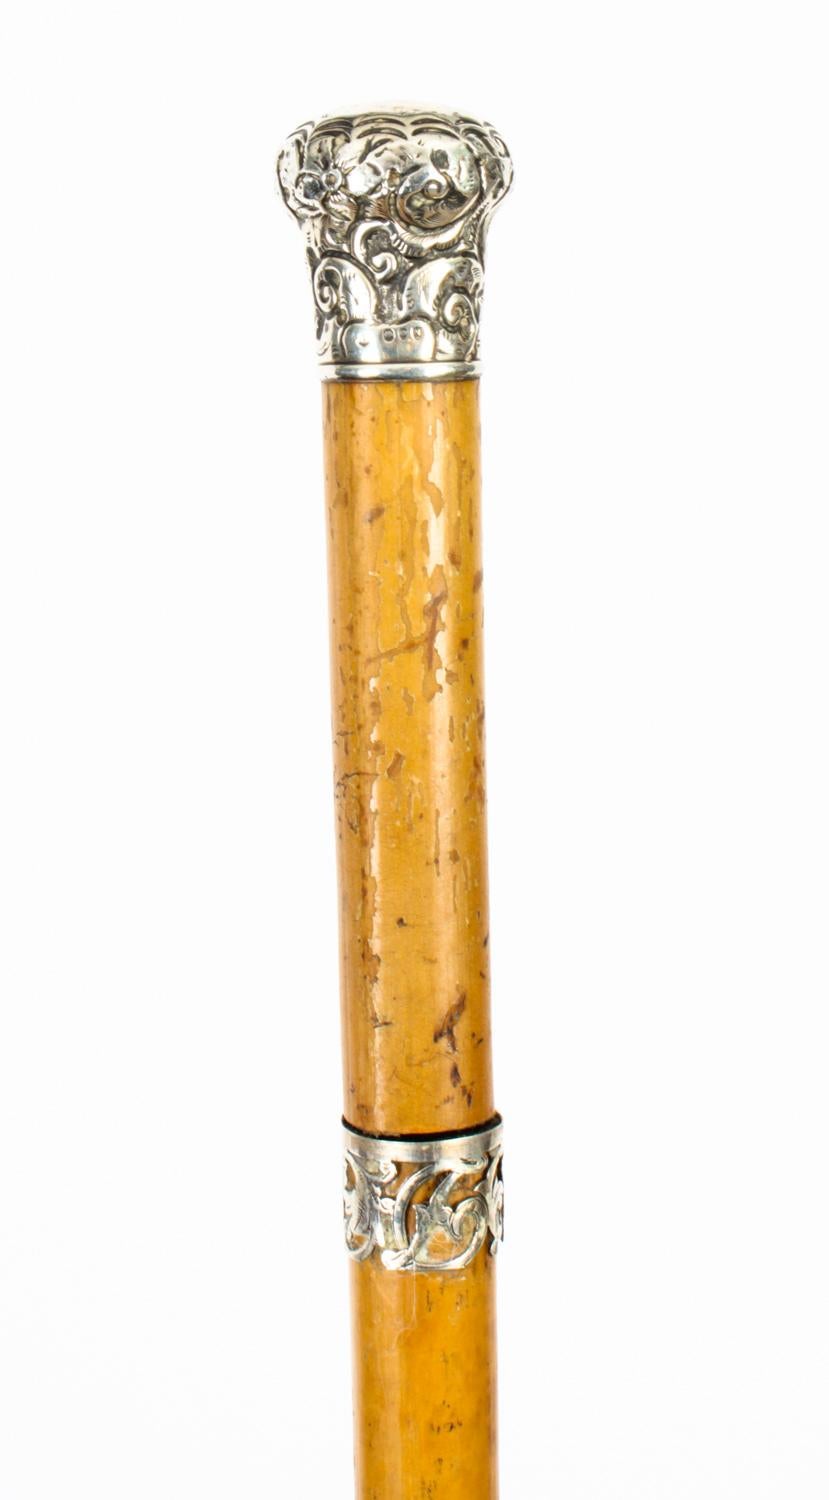 This is a beautiful antique English gentleman's malacca and sterling silver pommel walking / sword stick bearing hallmarks for London 1888.
 
The striking stick features an ornate silver pommel embossed with scrolling foliage and pierced collar on